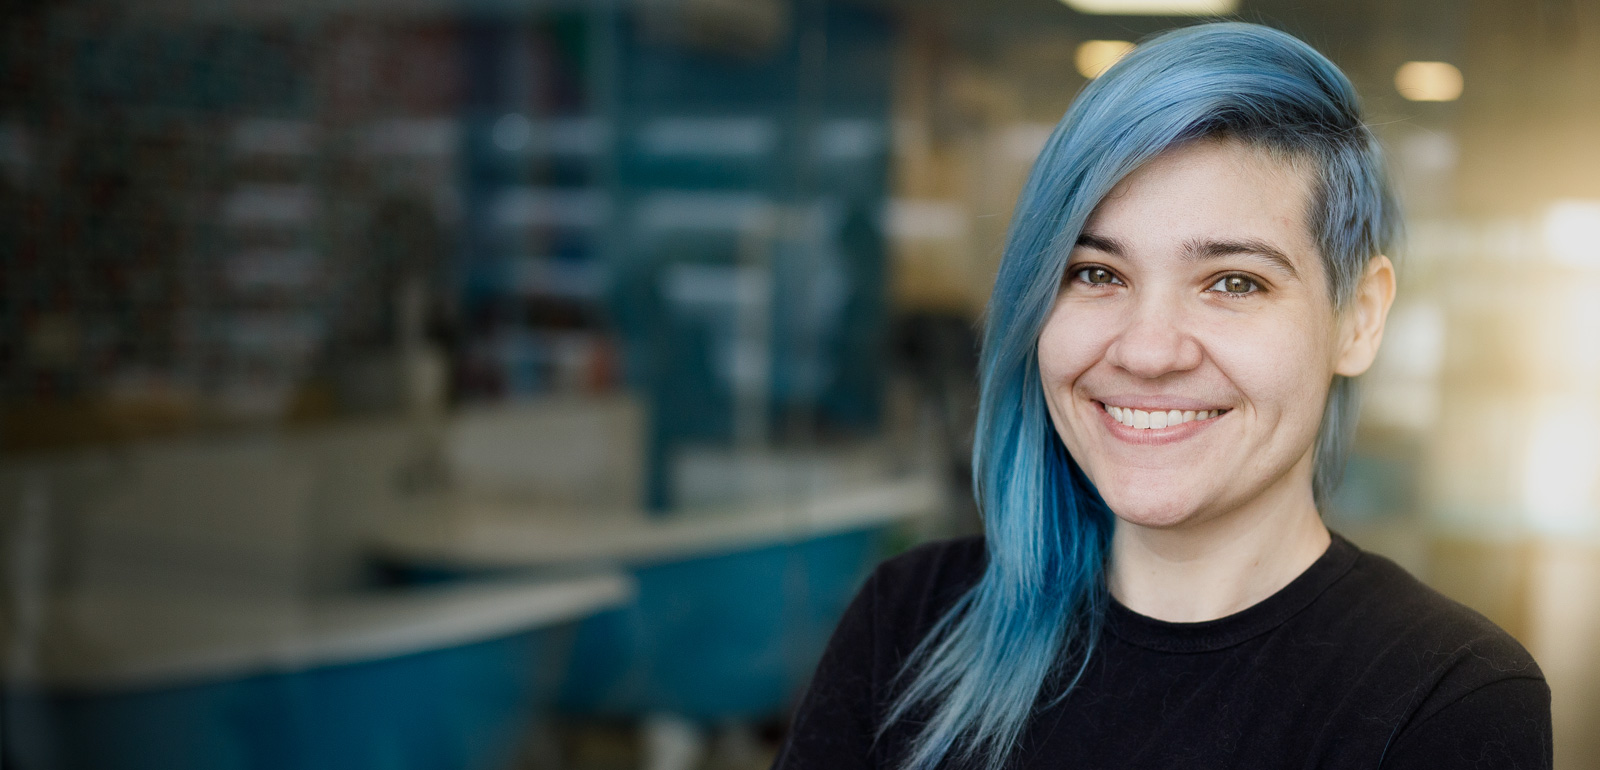 Woman with blue hair smiles